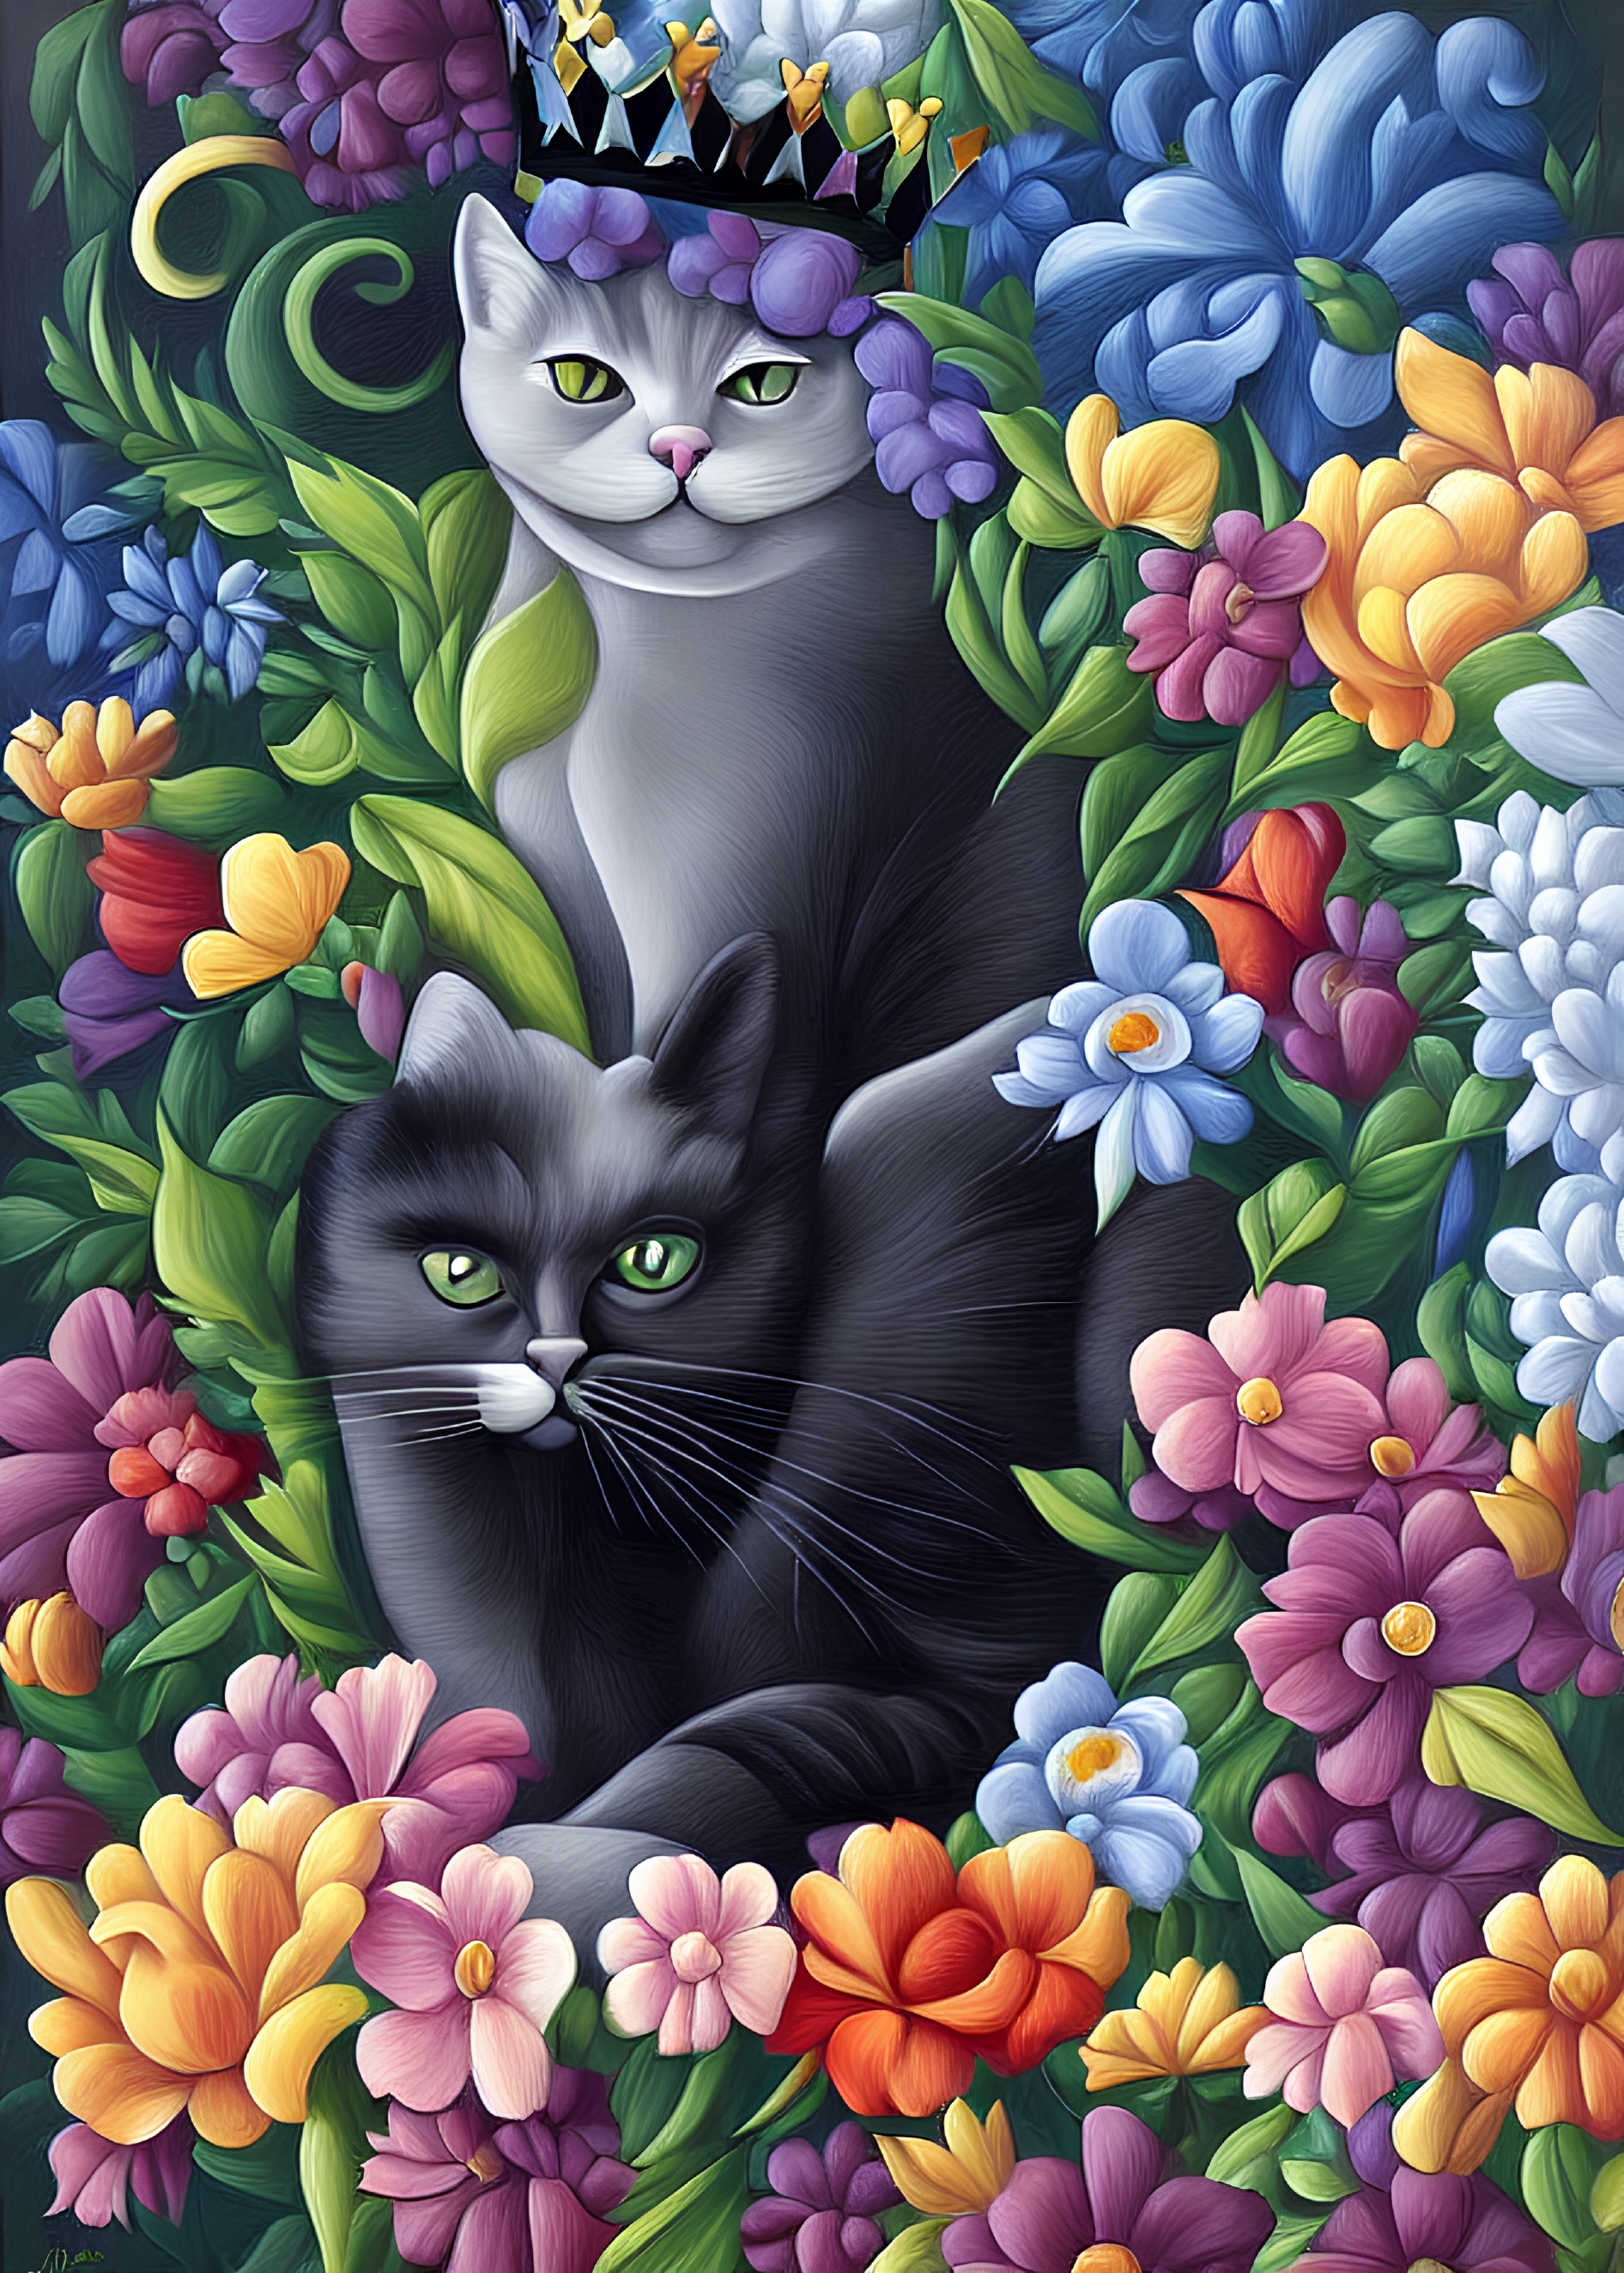 Crowned white cat and black cat surrounded by vibrant flowers